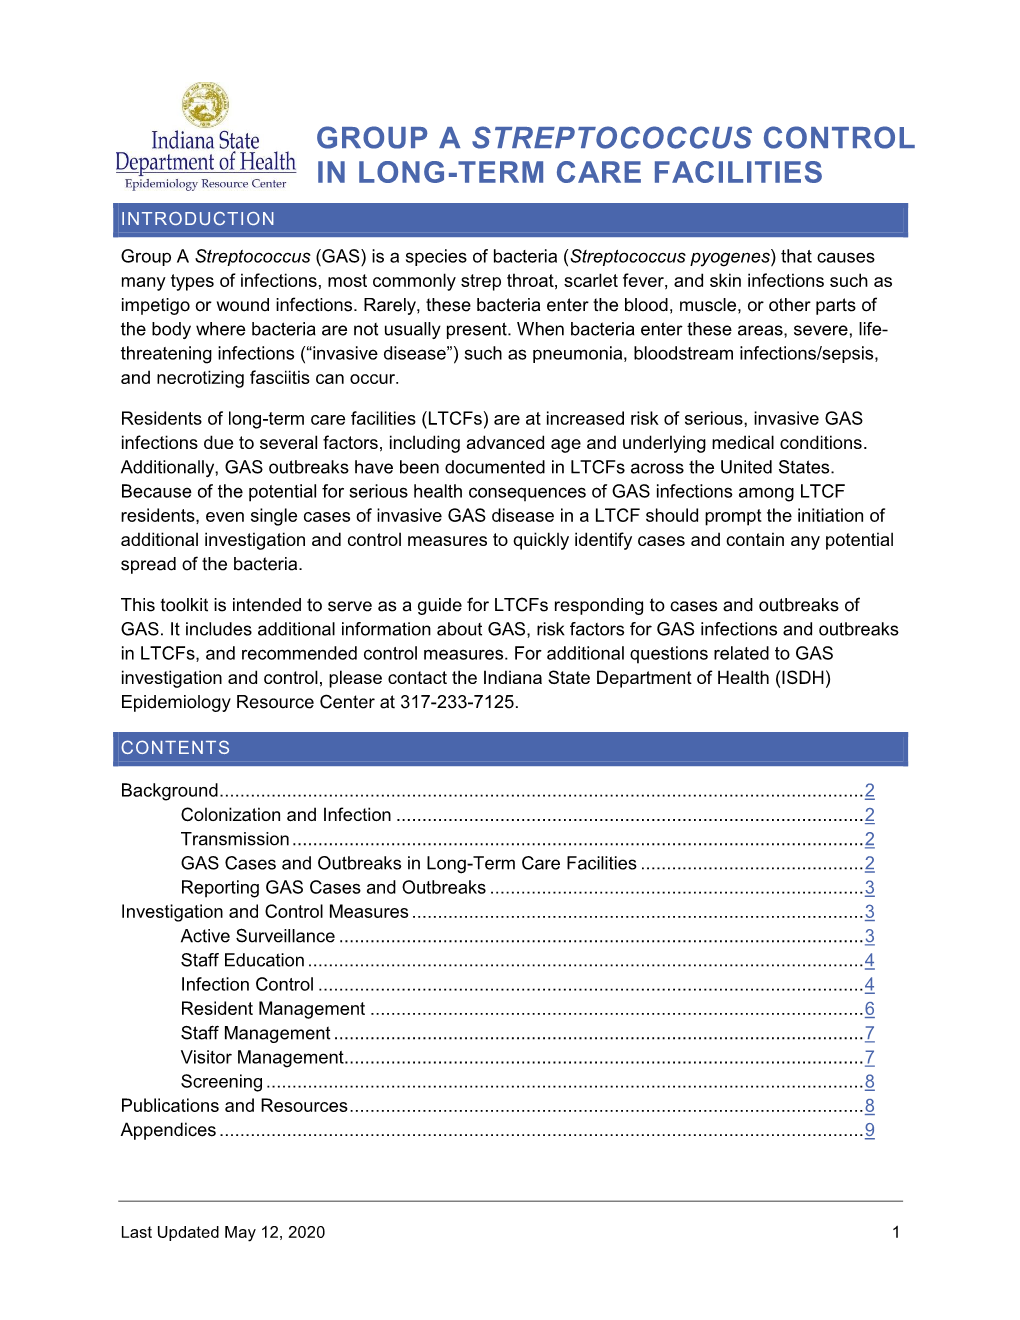 Long Term Care Facility Group a Streptococcal (GAS) Toolkit